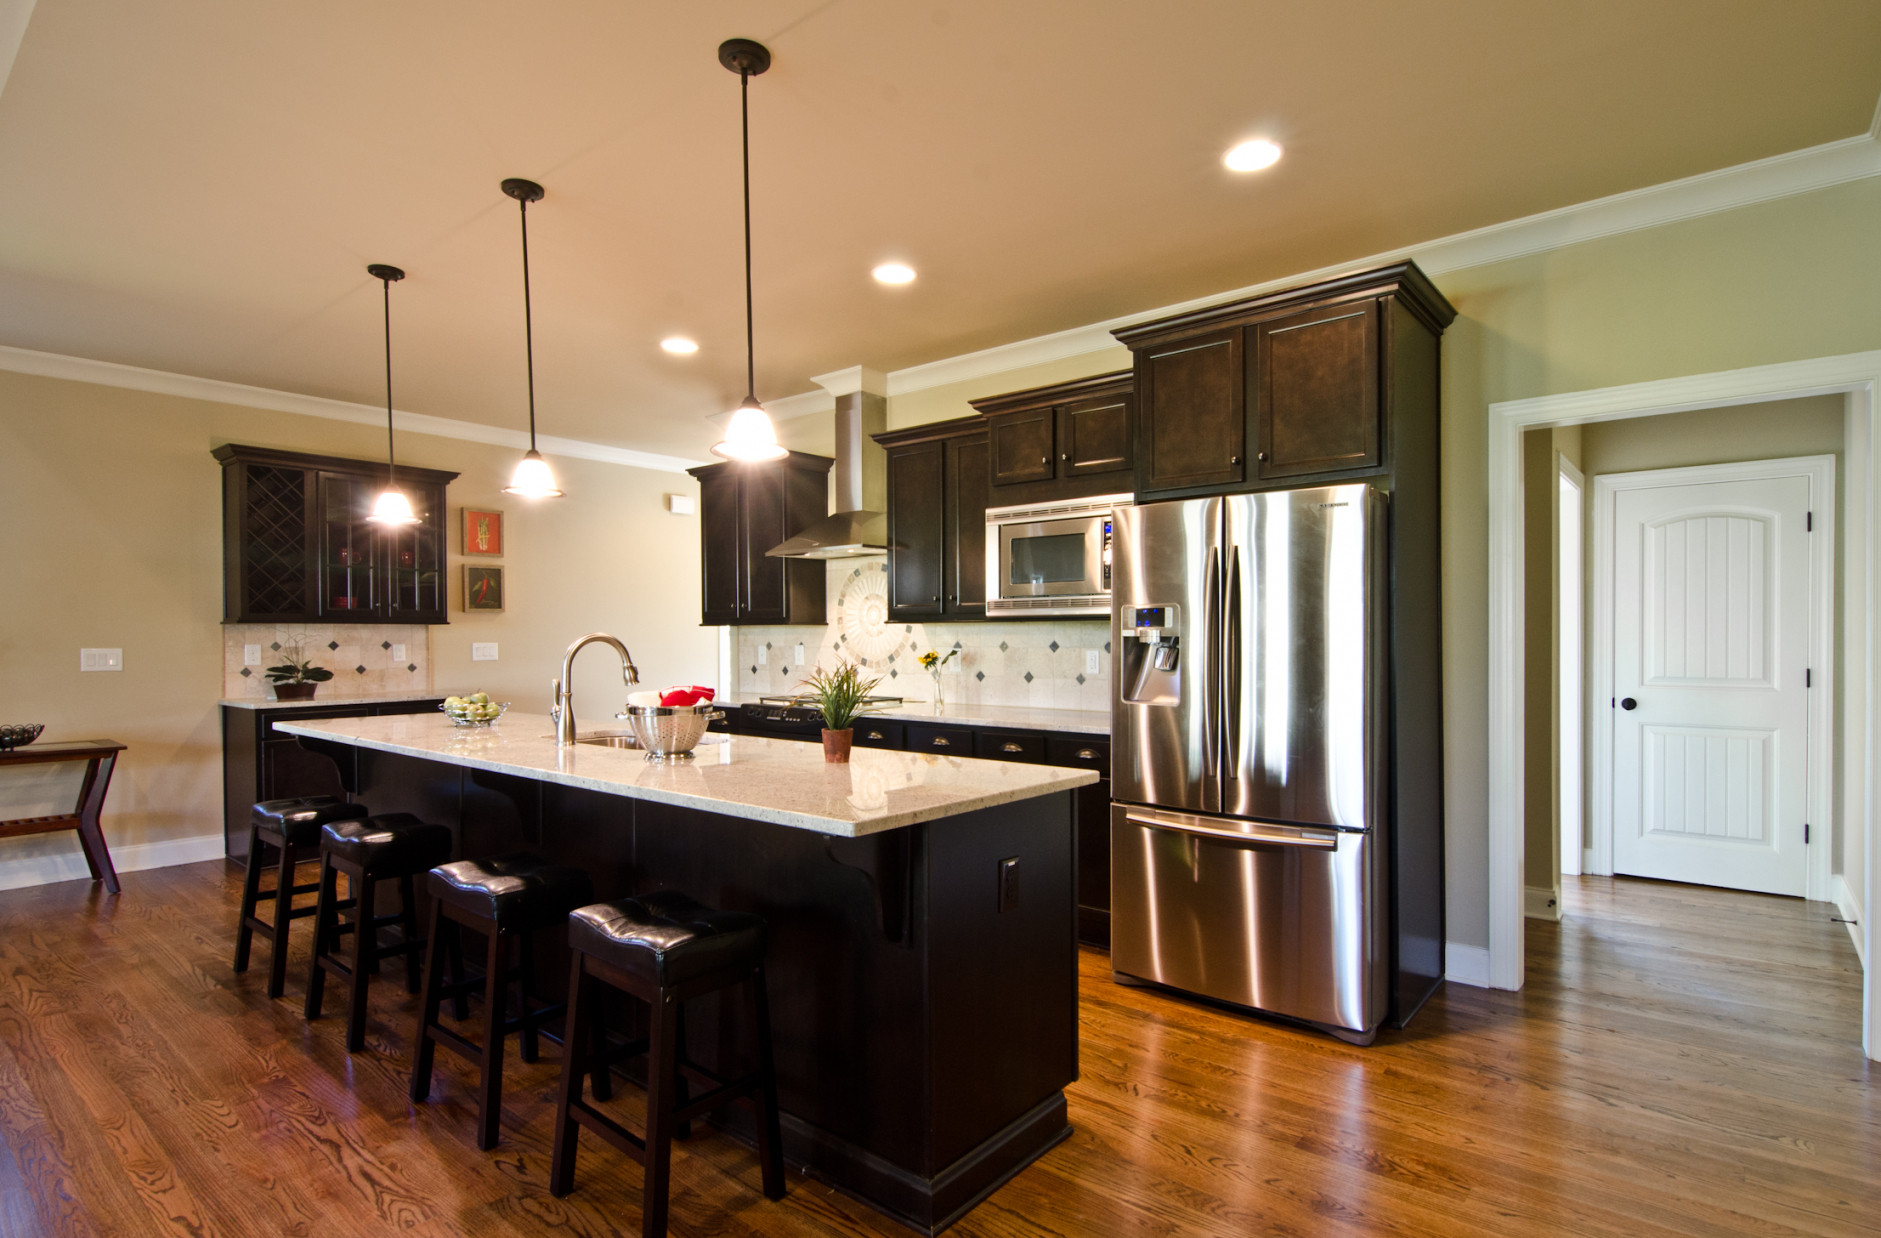 Home Depot Kitchen Remodel Cost
 Average Cost A Home Depot Kitchen Remodel Plancha